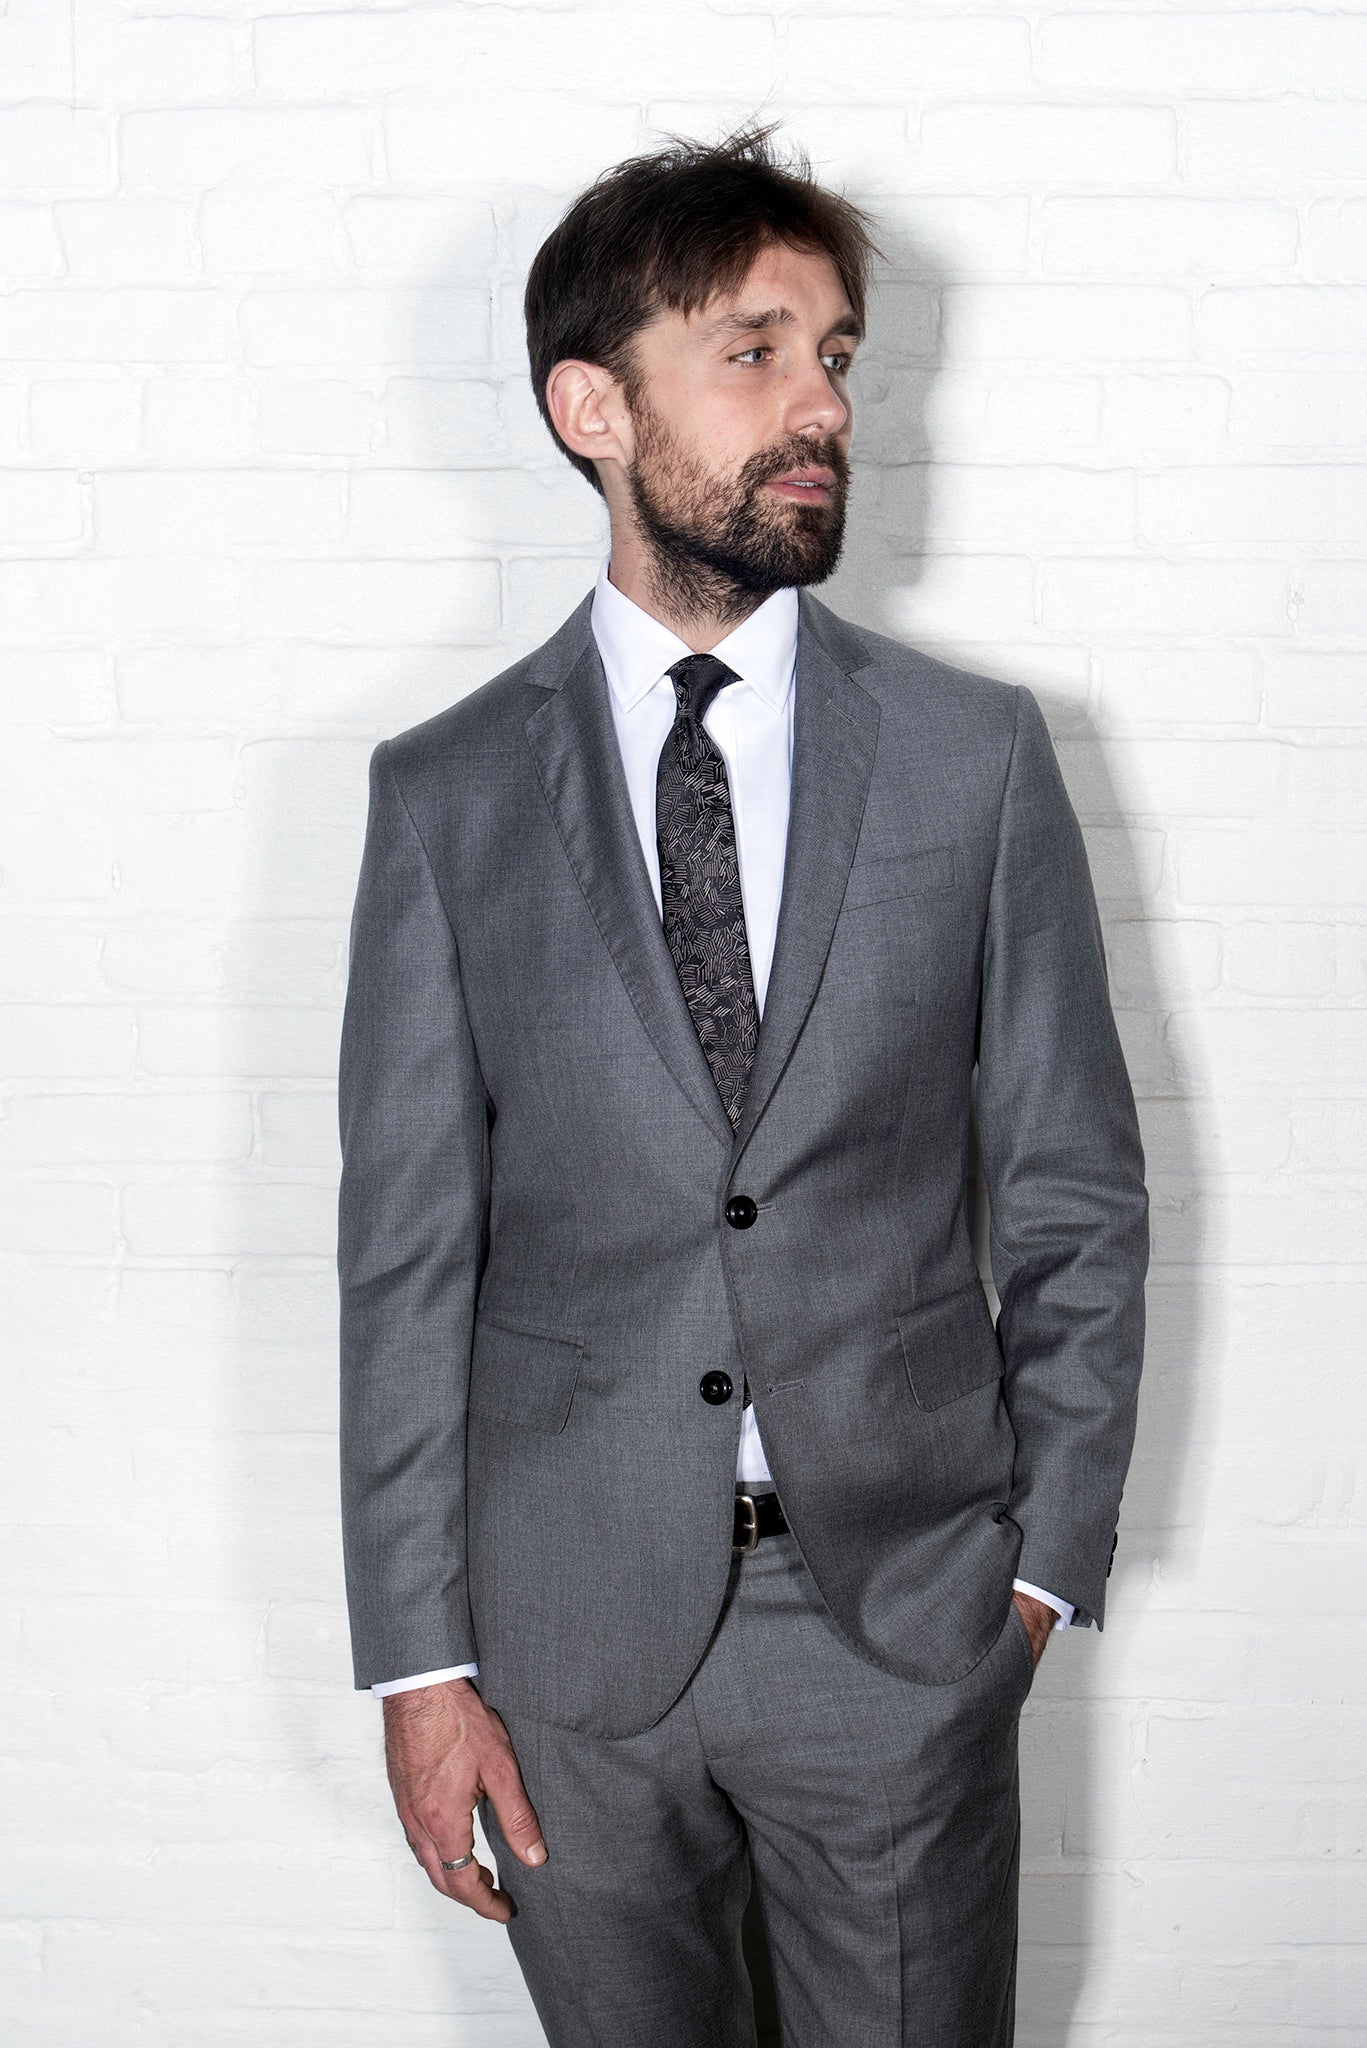 2020 Version BKT50 Tailored Jacket in Super 110s Twill - Dove Gray